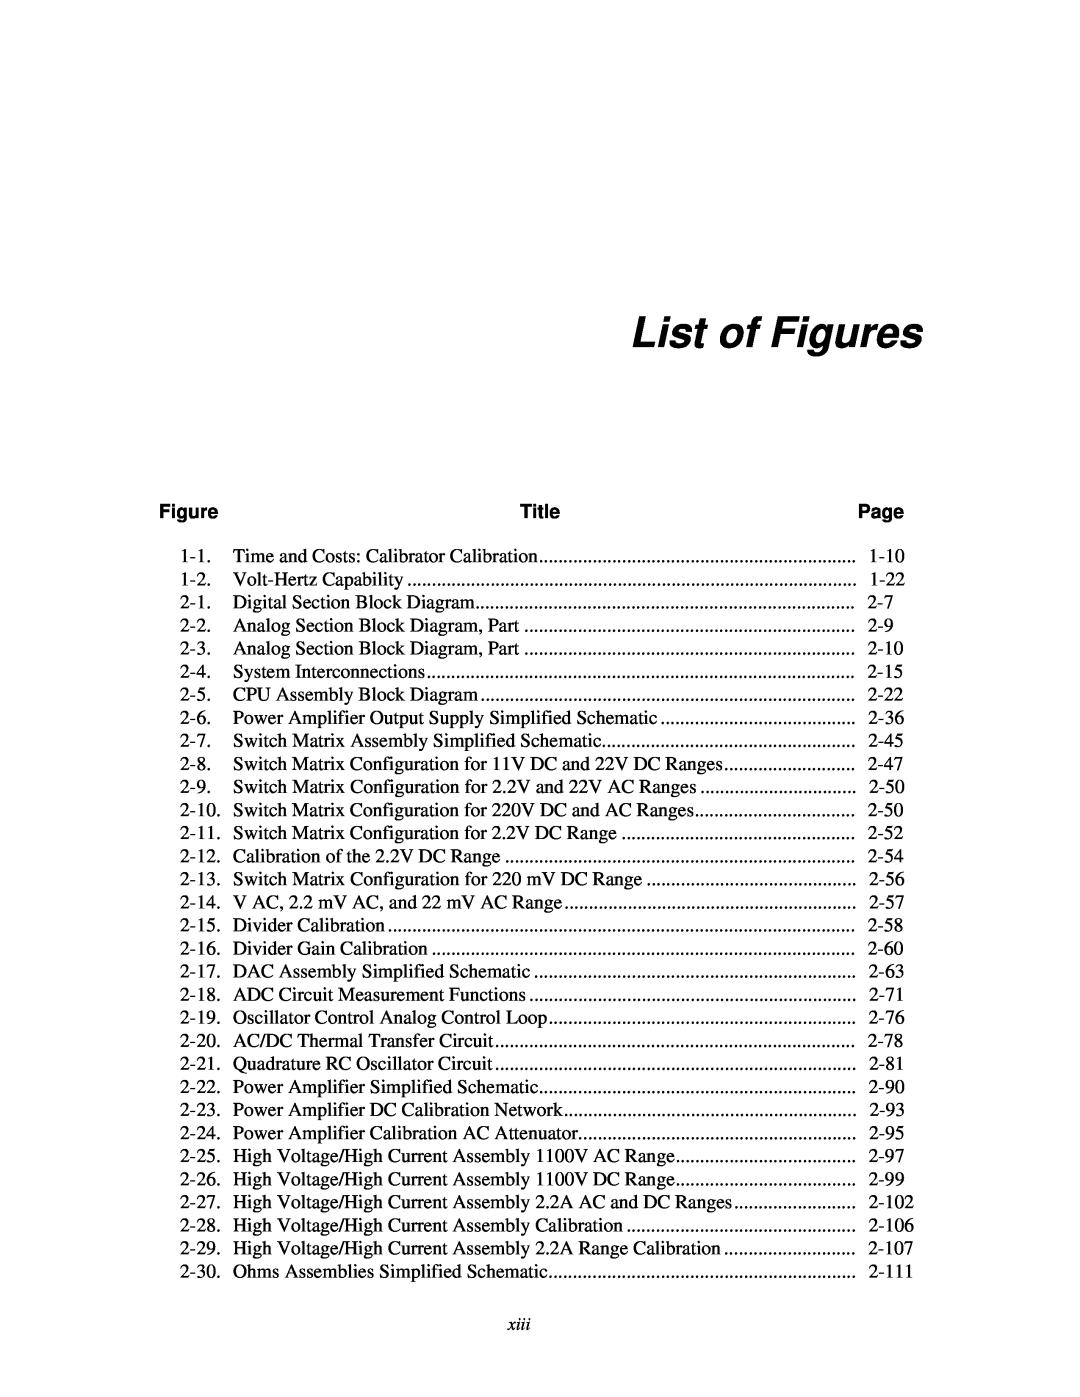 Fluke 5720A service manual List of Figures, Title, Page 